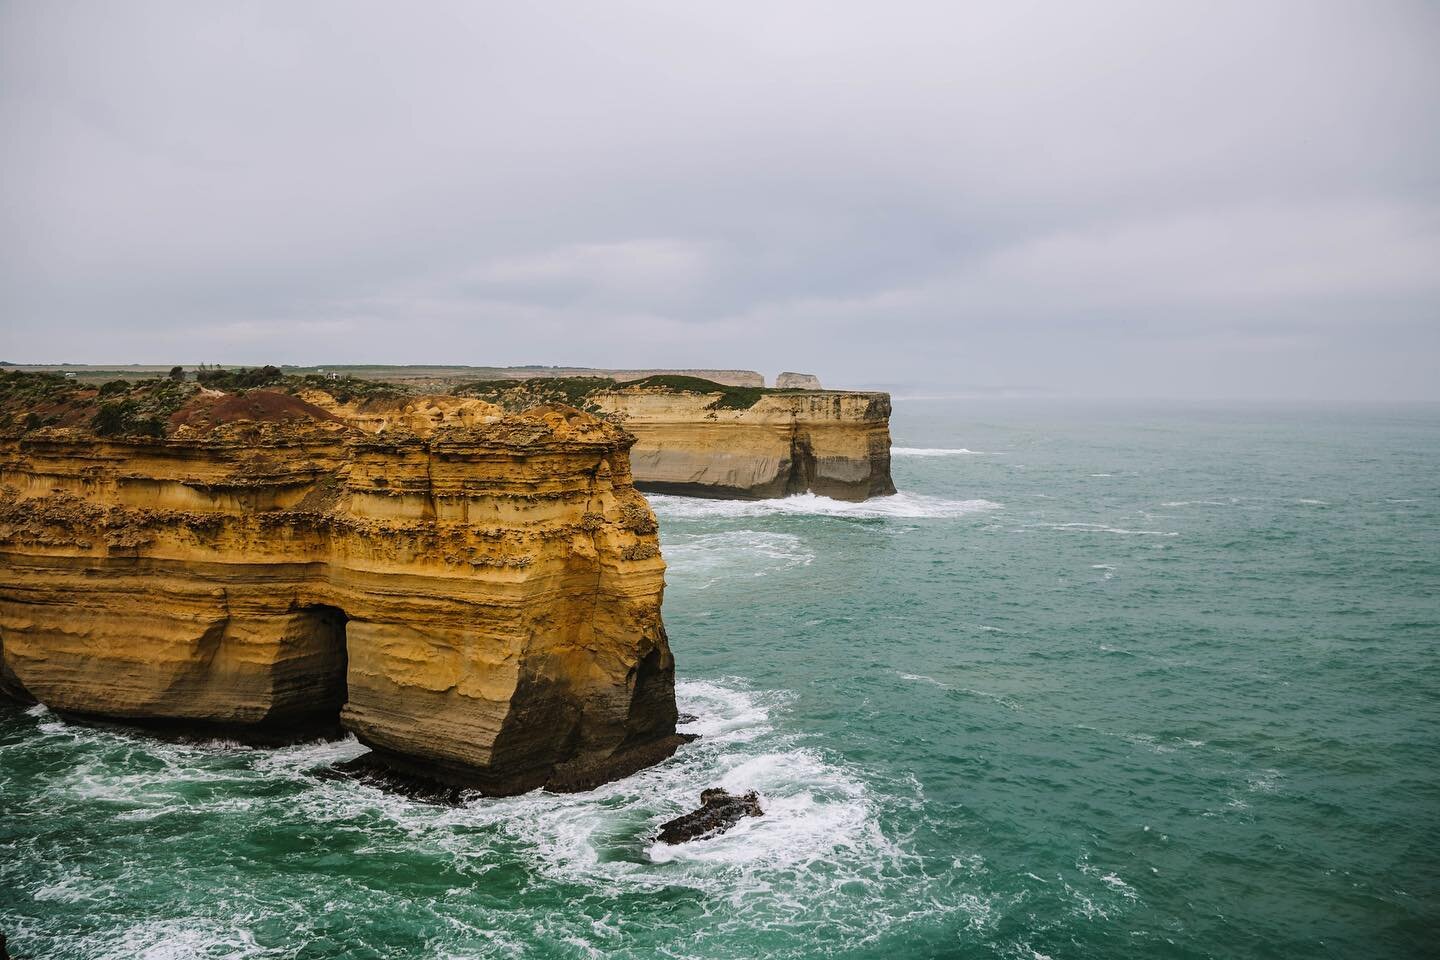 On our way to Adelaide to spend Easter with my family we decided to travel the @greatoceanroadaustralia 
Our only regret is not doing it sooner!